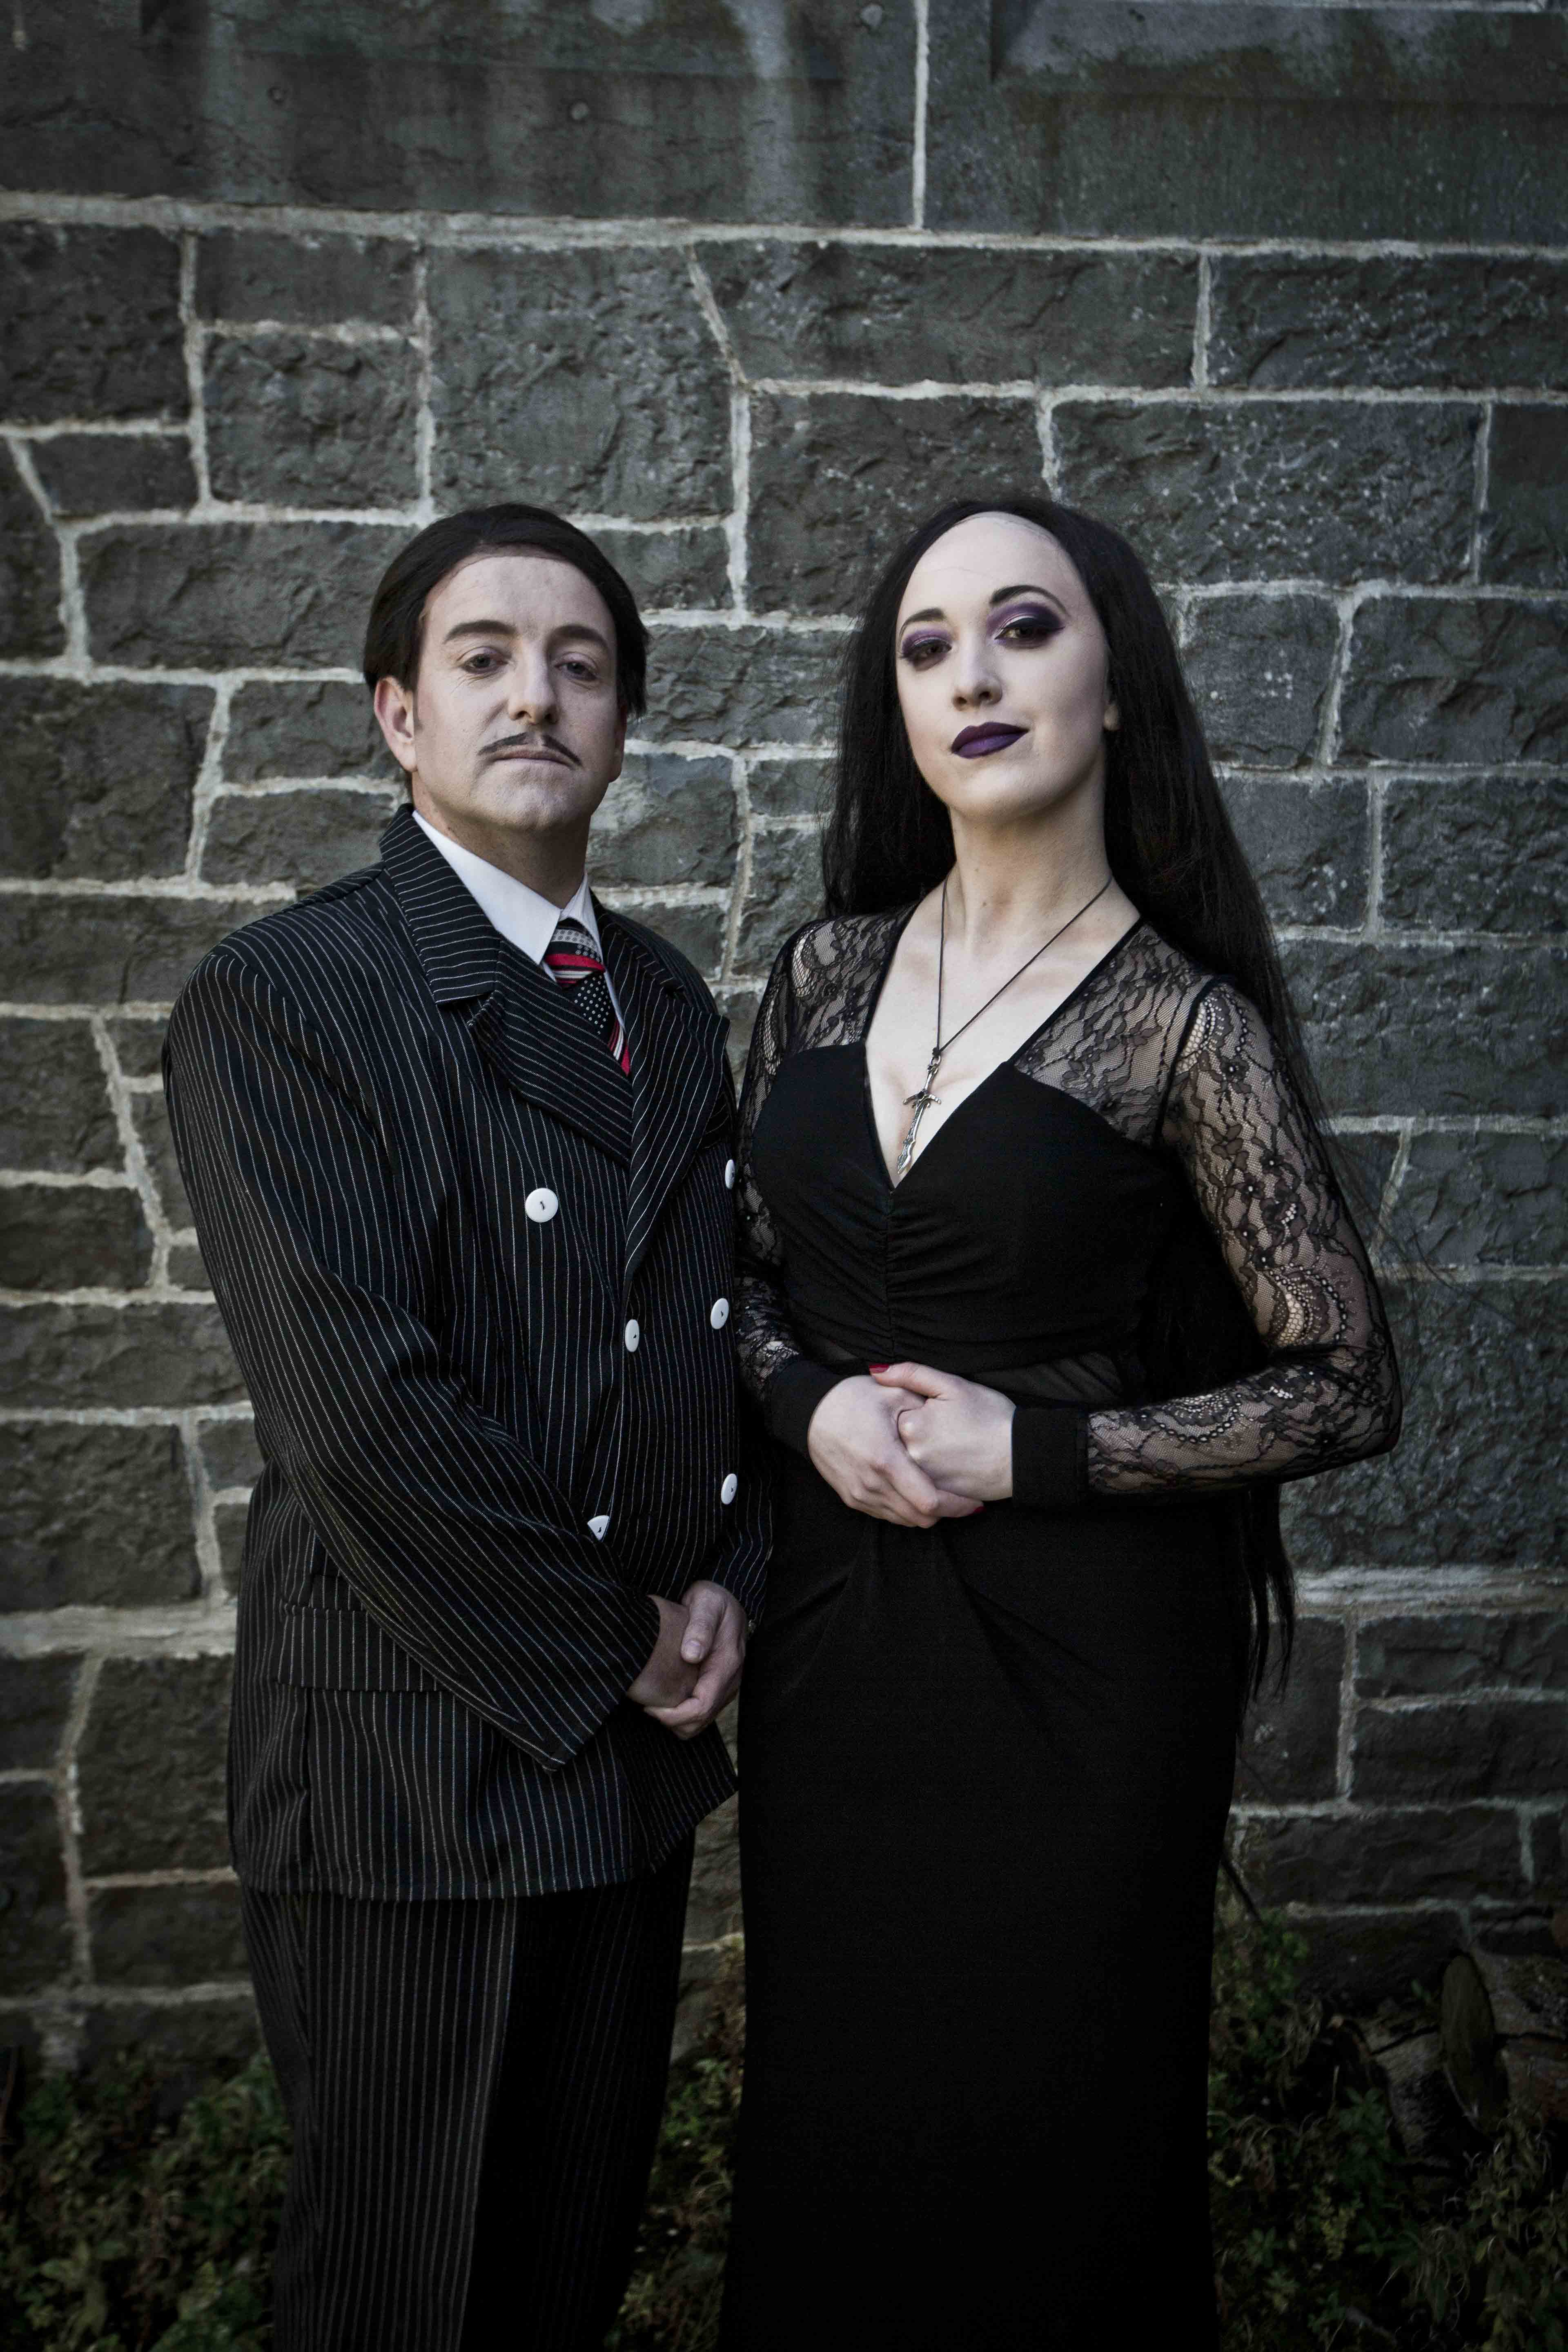 Coming of age - The Addams Family